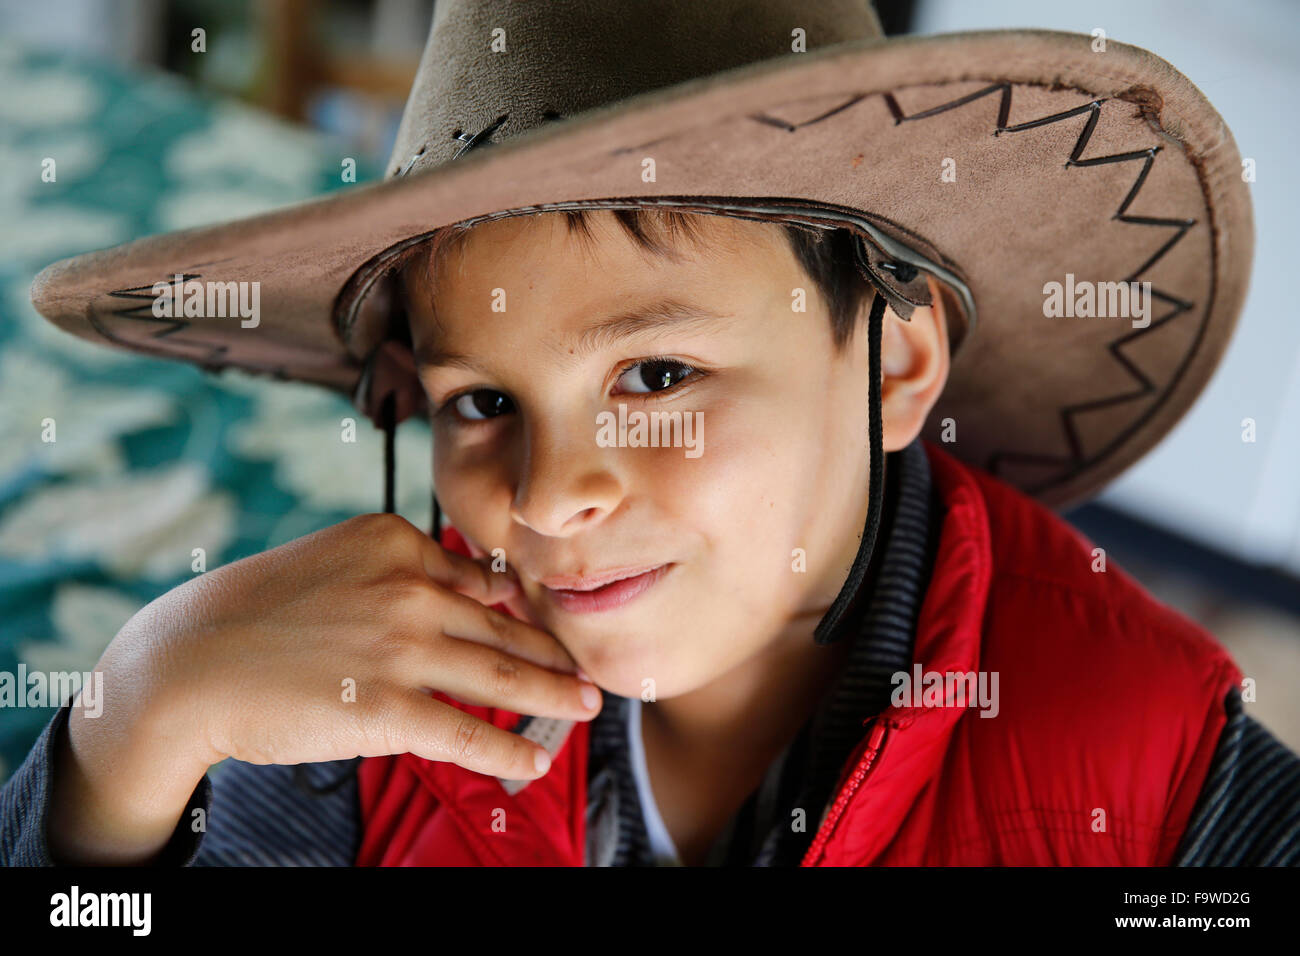 8-year-old boy wearing a hat. Stock Photo